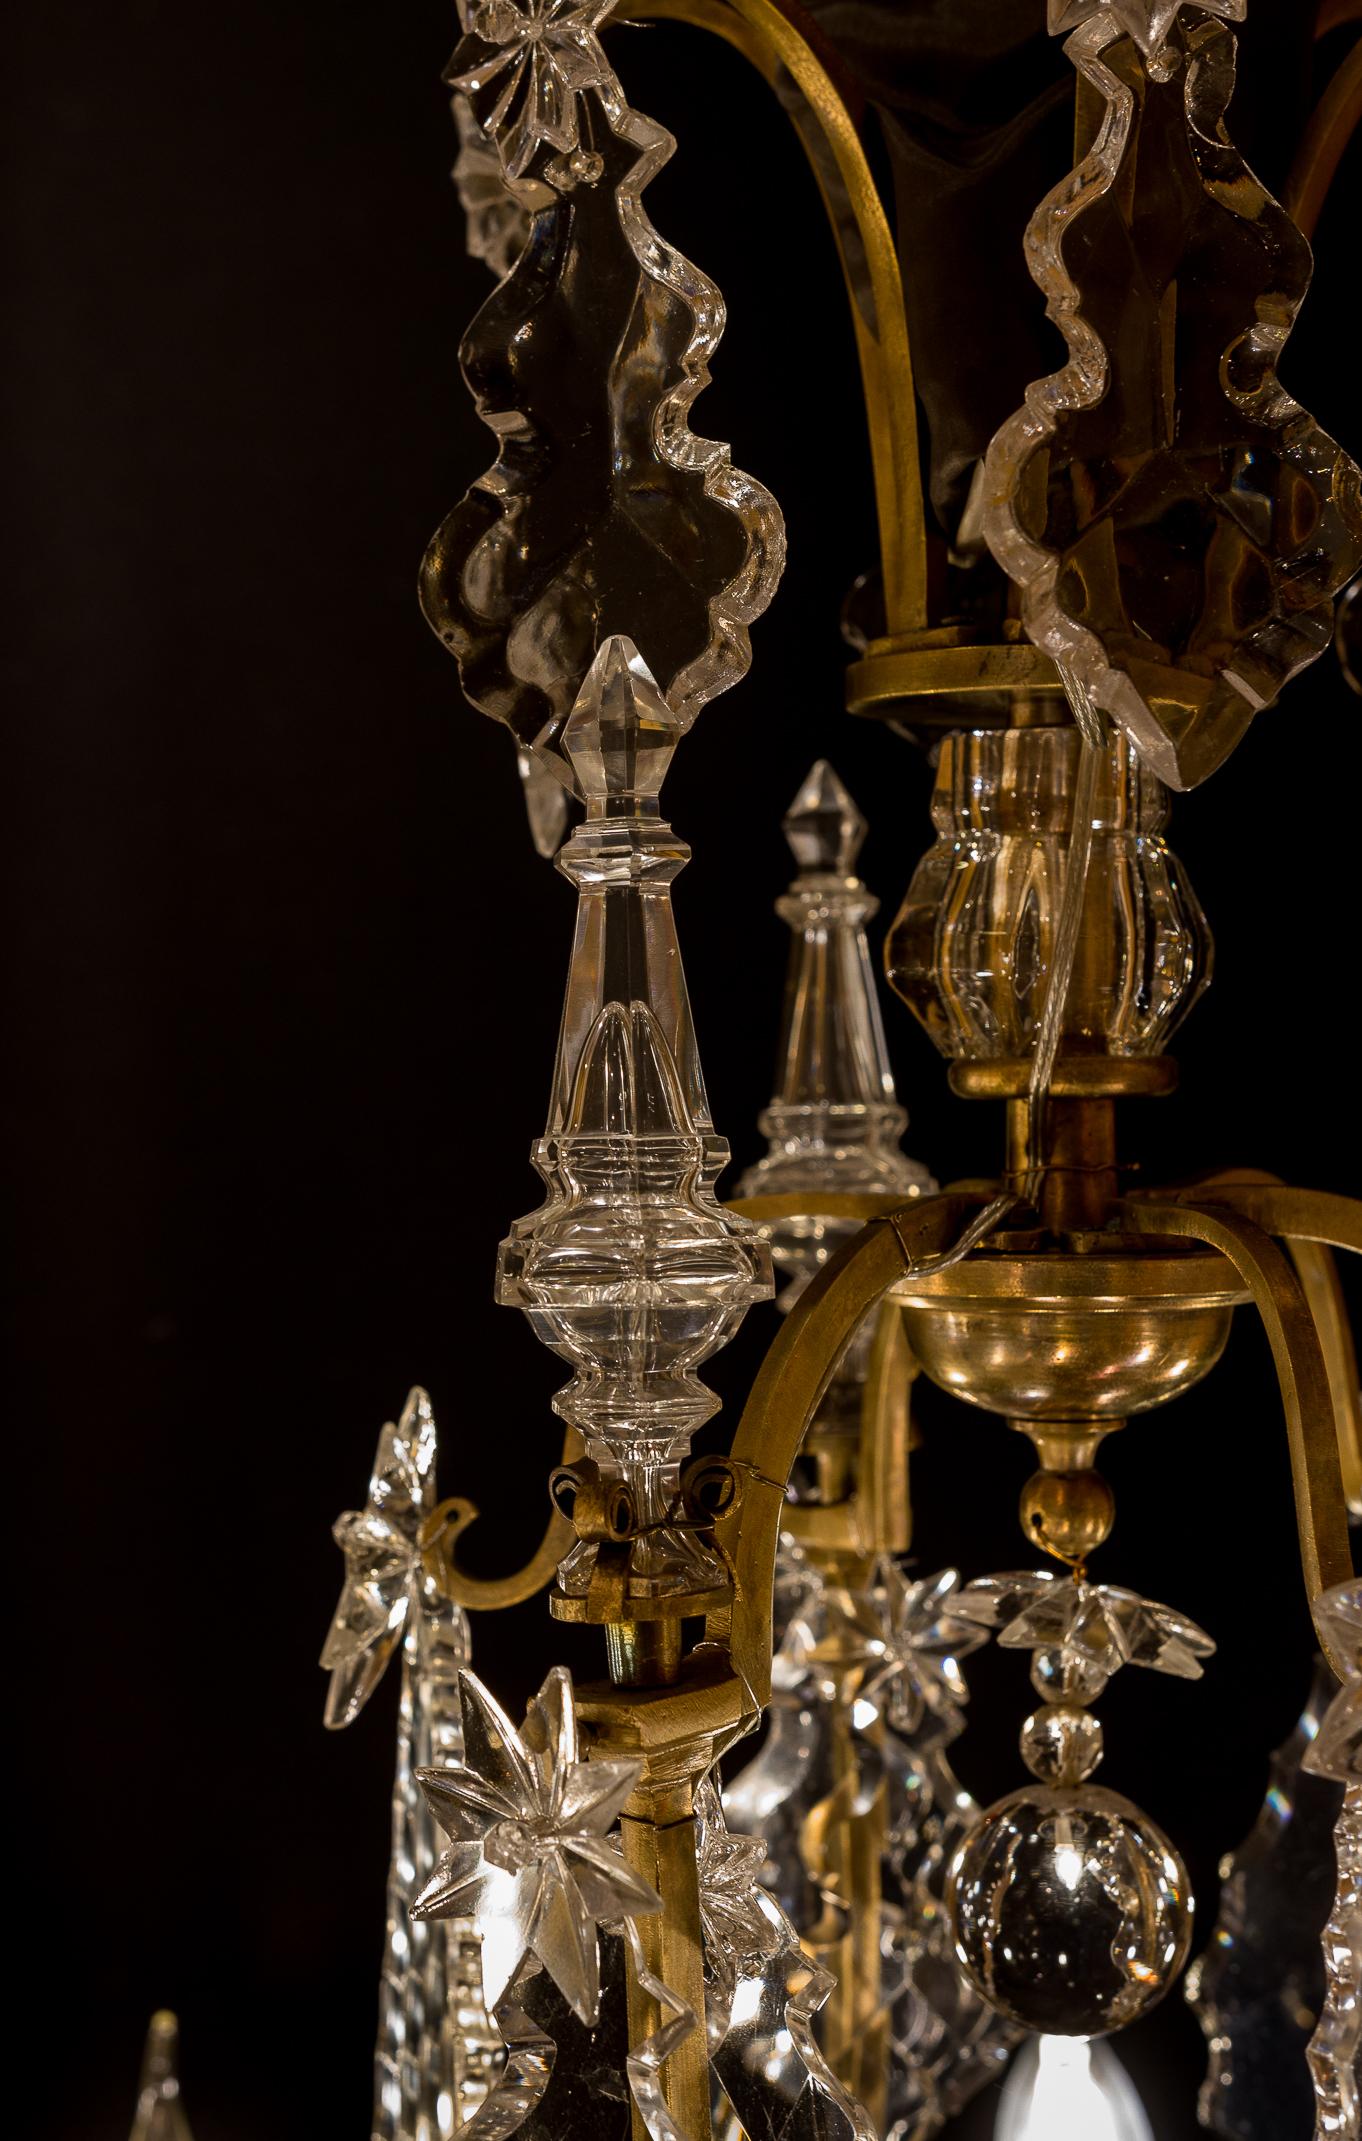 20th Century French Louis XV Style, Gilt-Bronze and Crystal Chandelier, circa 1900-1920